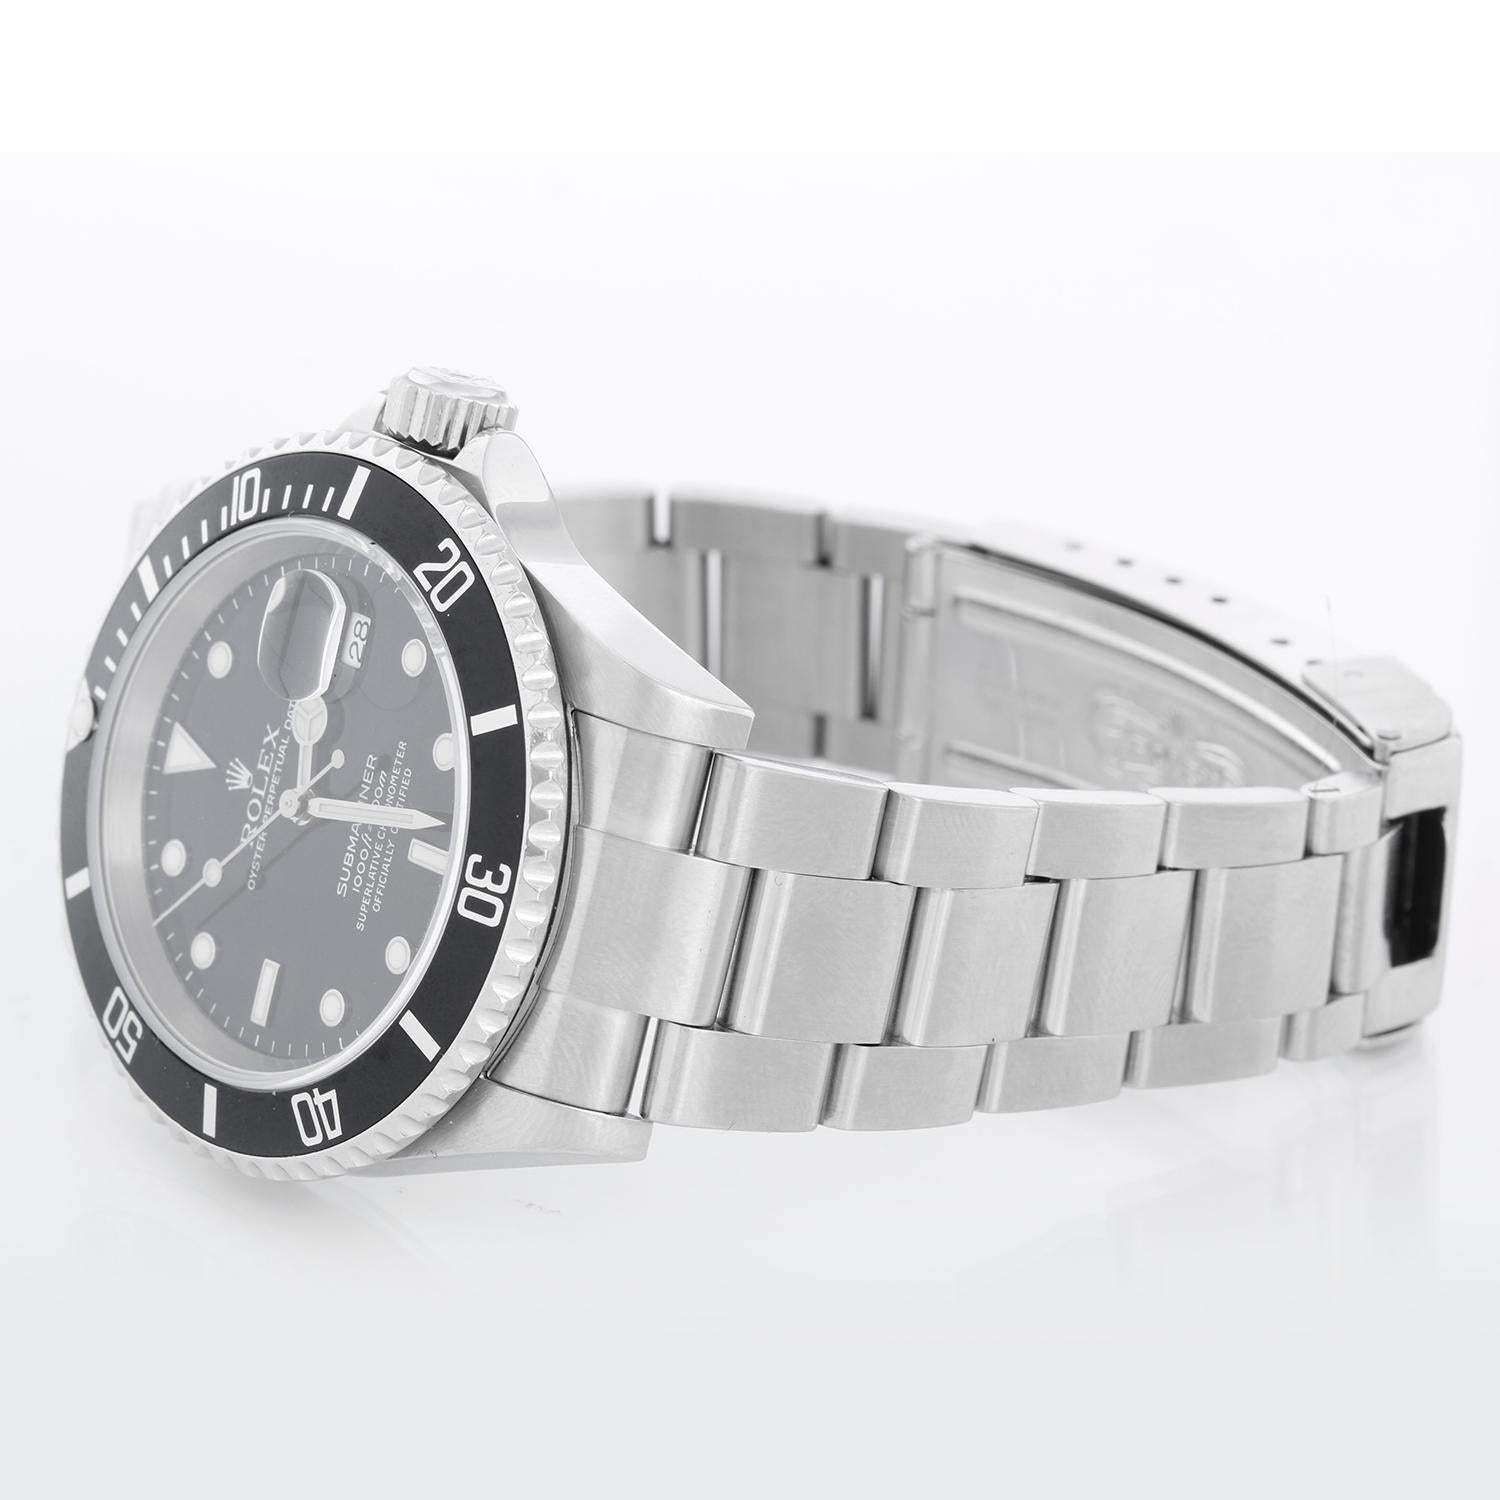 Rolex Submariner 16610 Stainless Steel Men's Watch - Automatic winding, 31 jewels, Quickset, sapphire crystal. Stainless steel case; rotating bezel with black insert. Black Dial. Stainless steel Oyster band . Pre-owned with custom box with paper